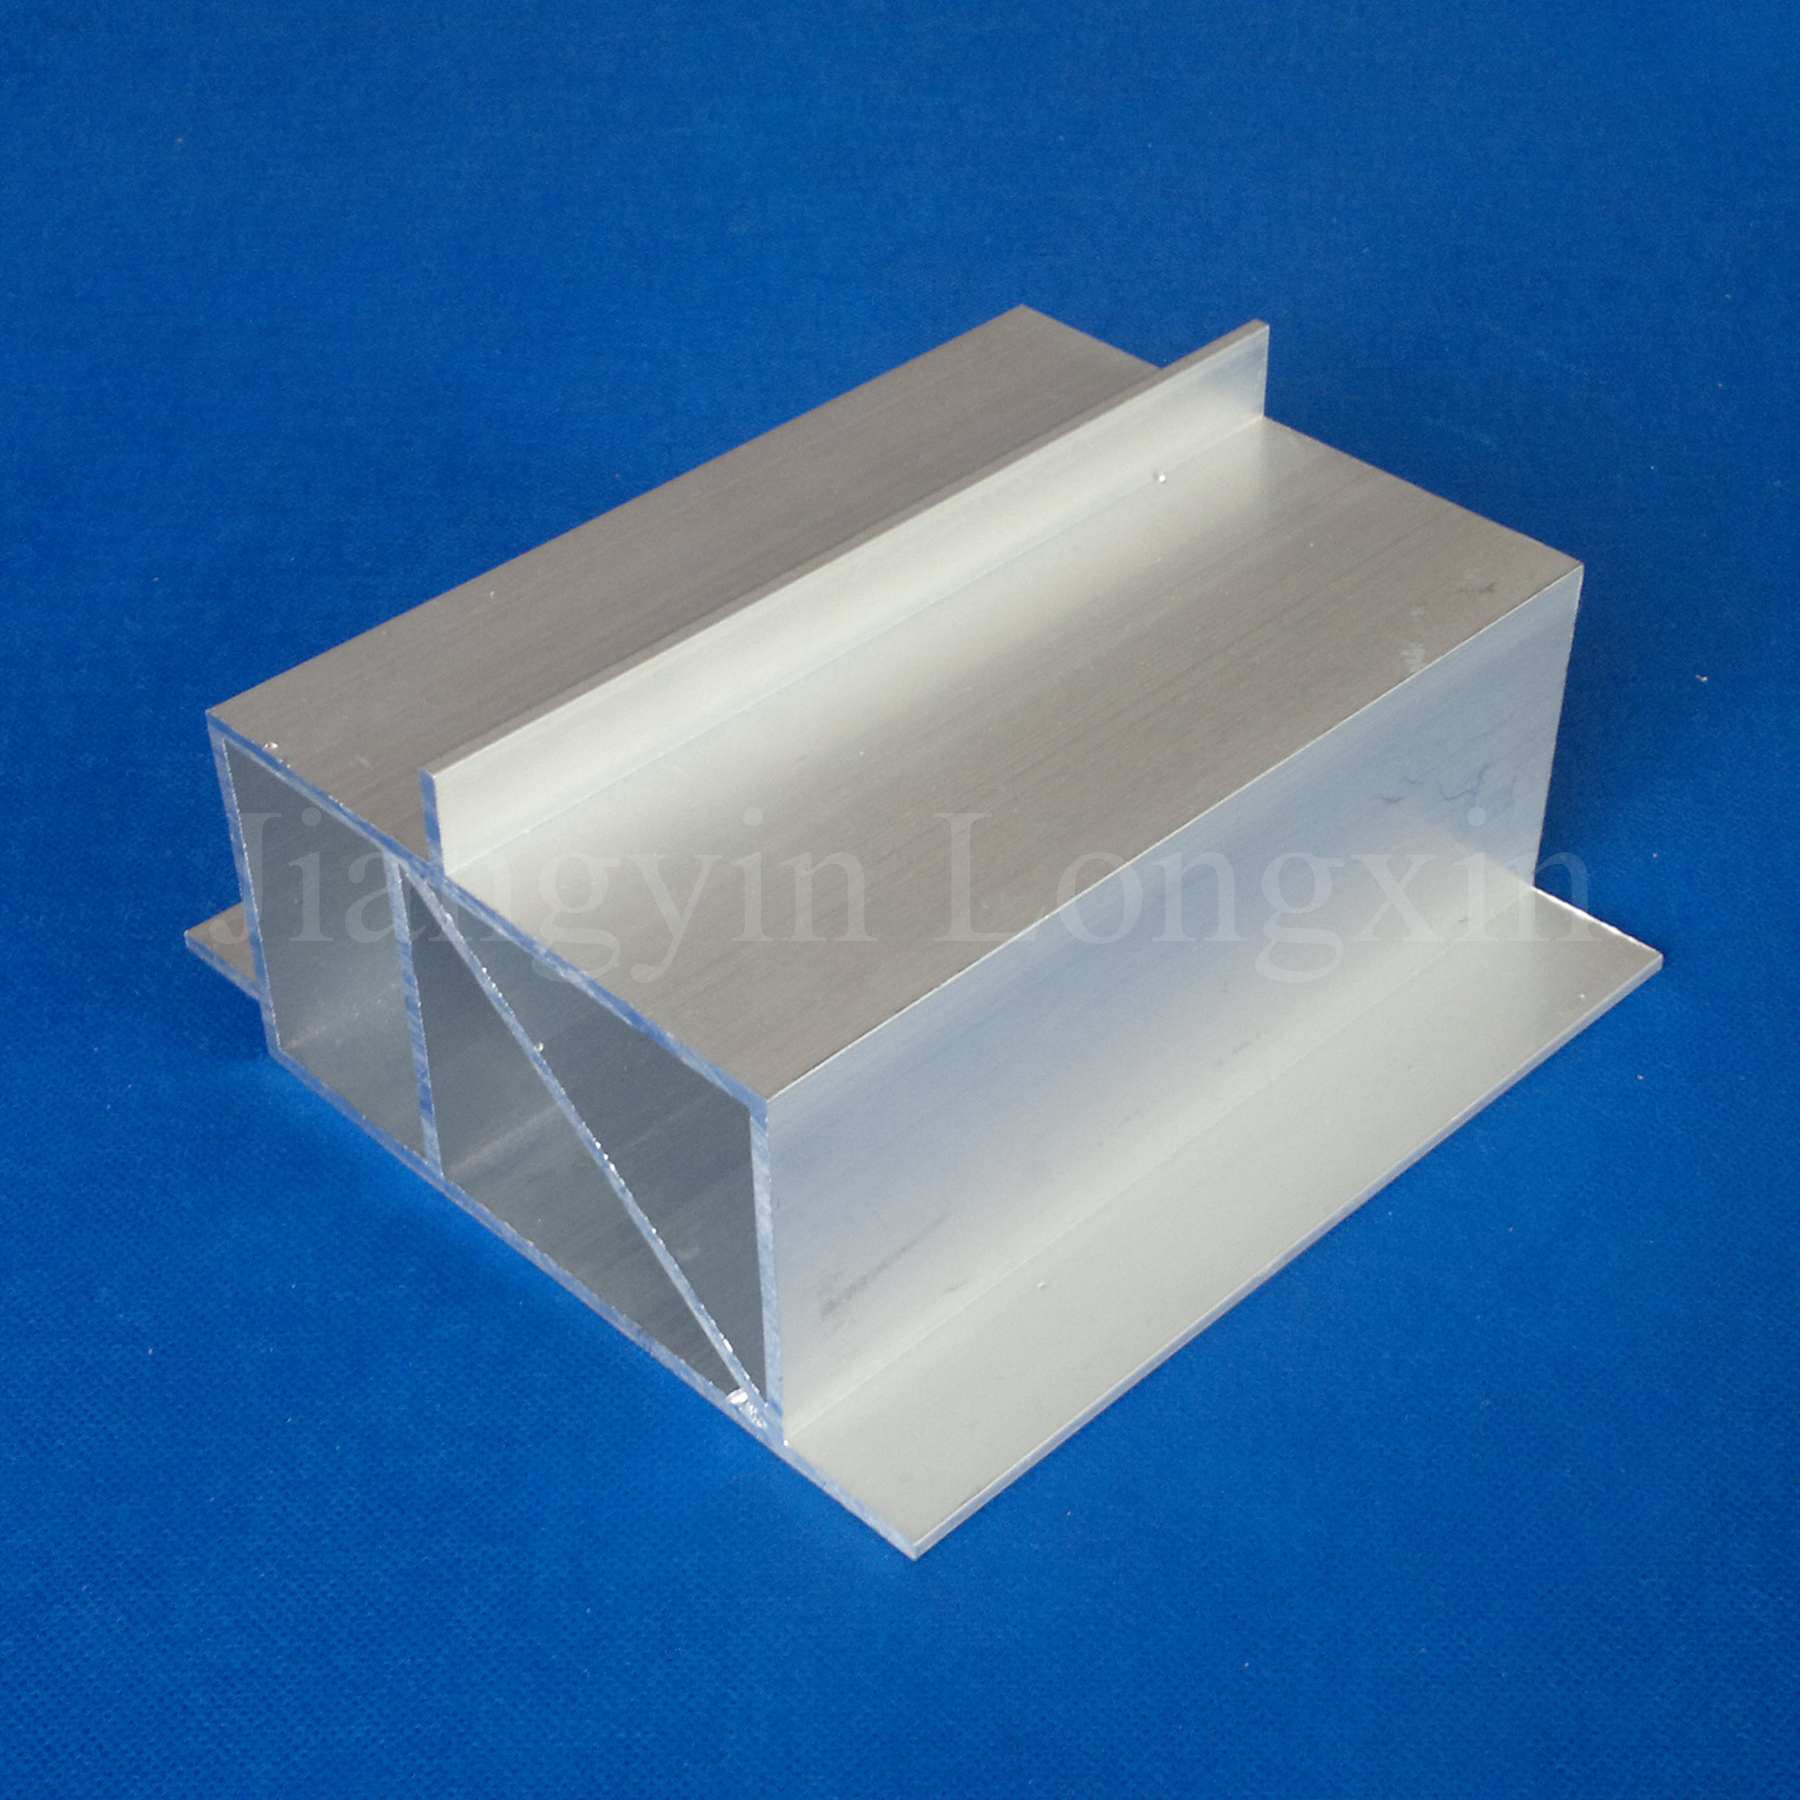 High Quality Aluminium Profile for Industry